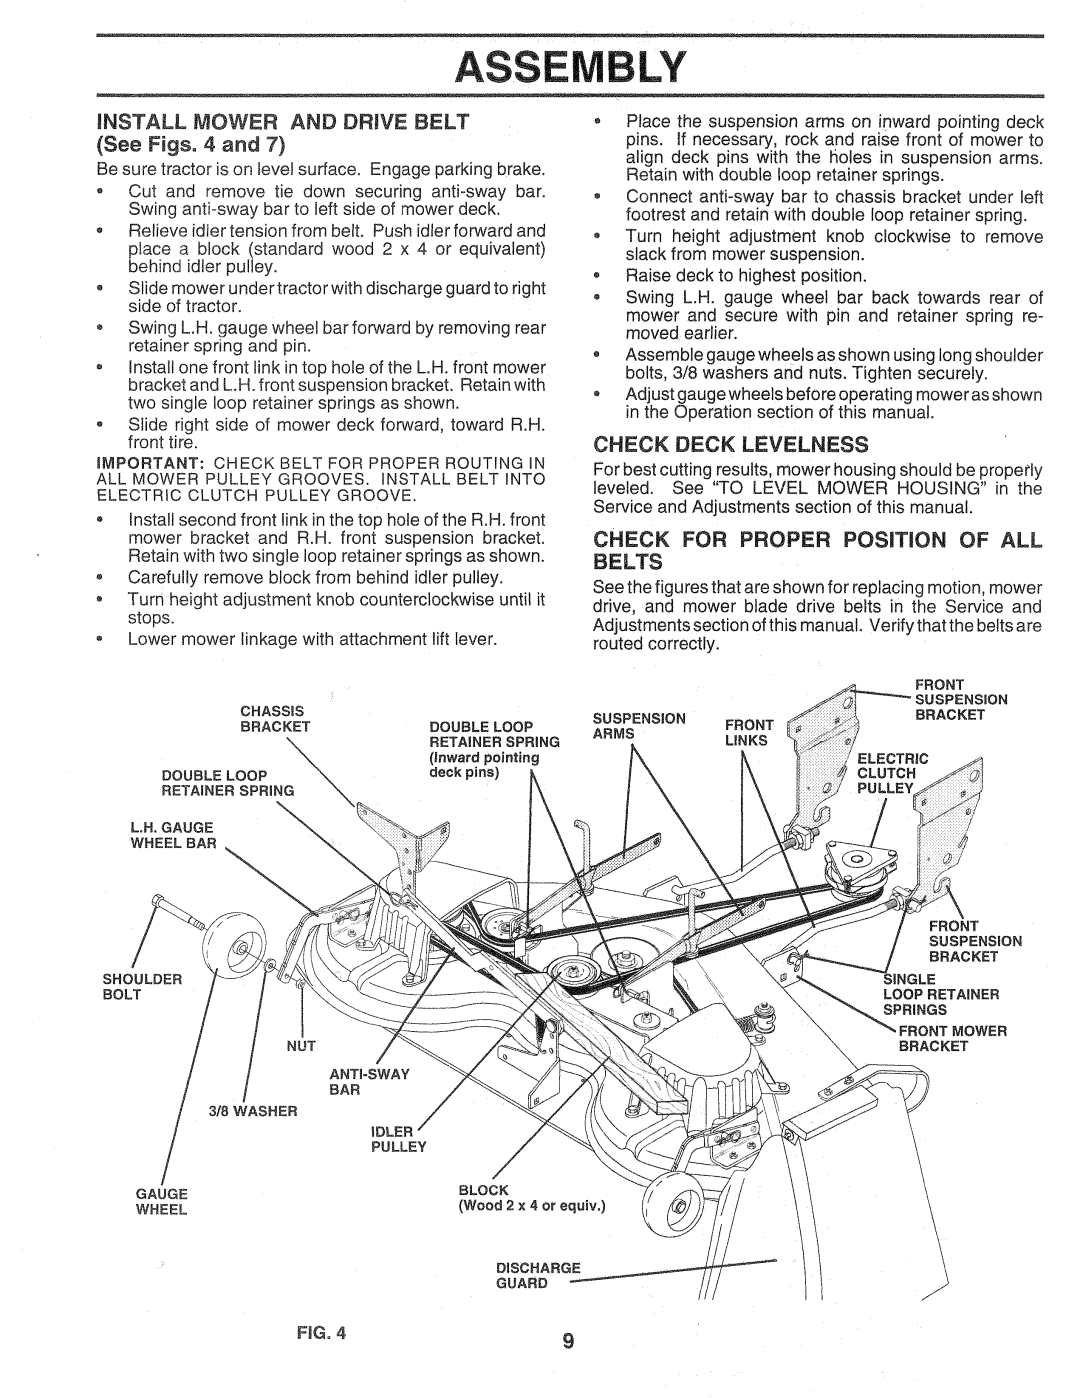 Sears 917.257720 owner manual Install Mower And Drive Belt, Check Deck Levelness, CHECK FOR PROPER POSiTiON OF ALL BELTS 